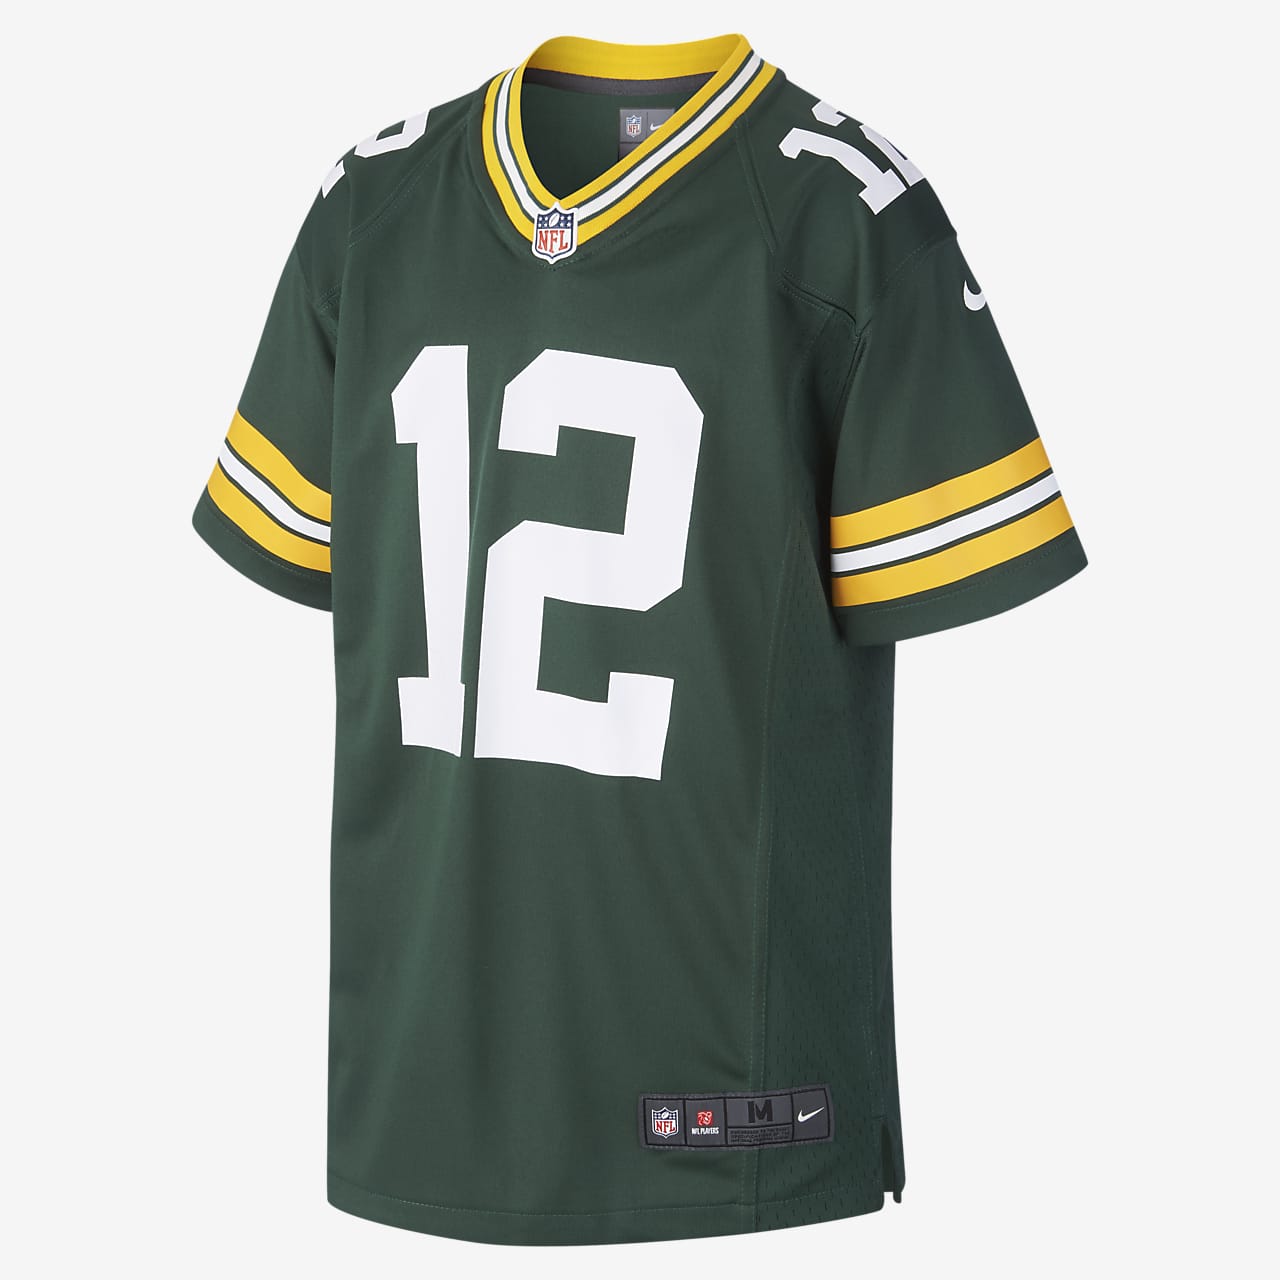 NFL Green Bay Packers Game Jersey (Aaron Rodgers) Older Kids' American  Football Jersey. Nike SI